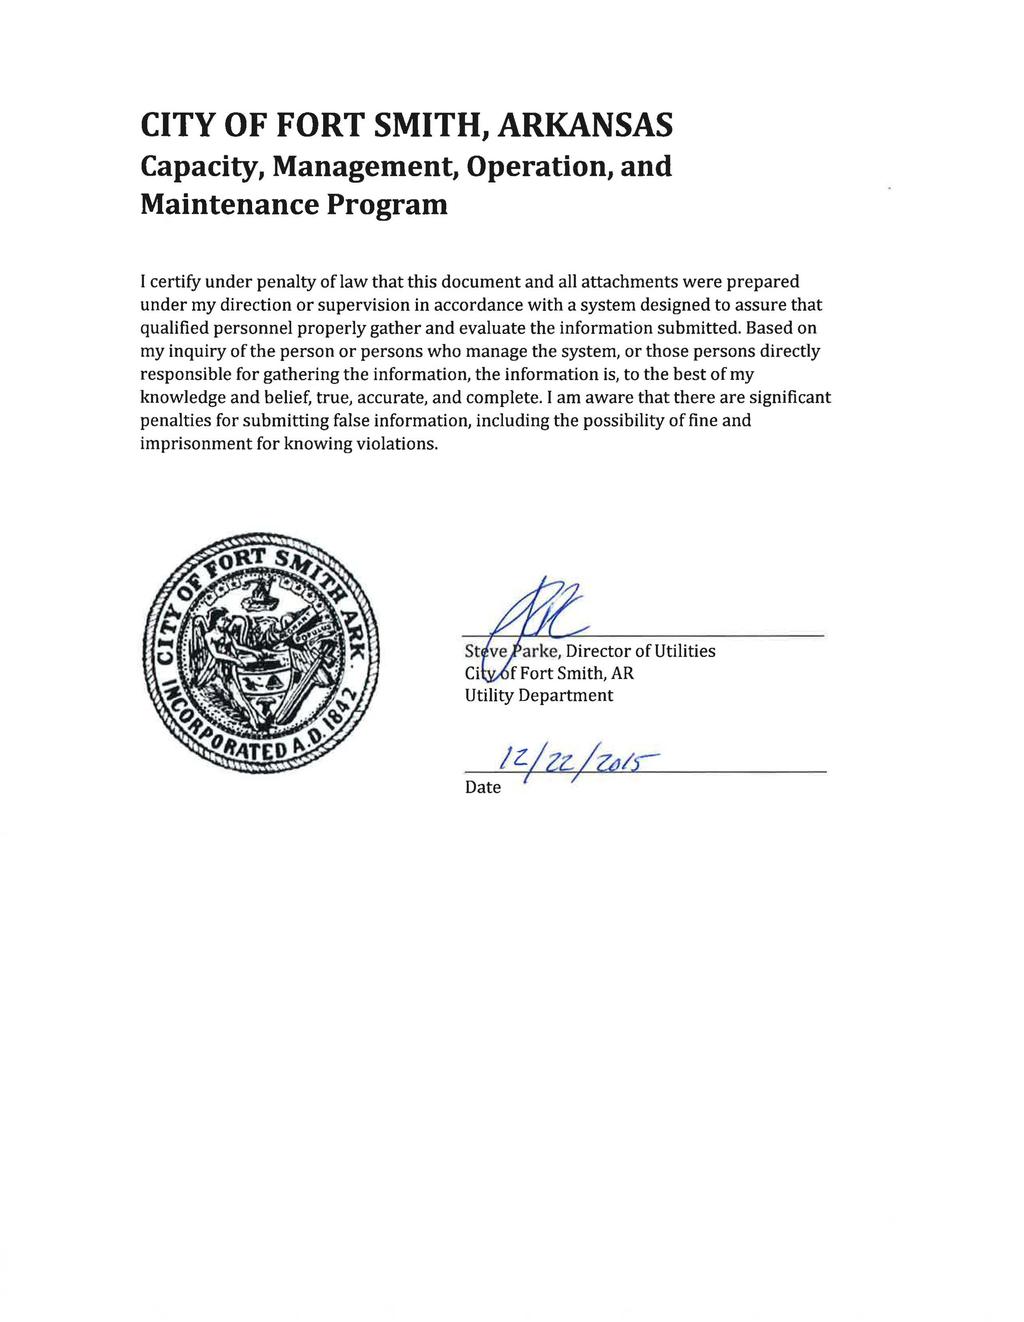 CITY OF FORT SMITH, ARKANSAS Capacity, Management, Operation, and Maintenance Program I certify under penalty of law that this document and all attachments were prepared under my direction or